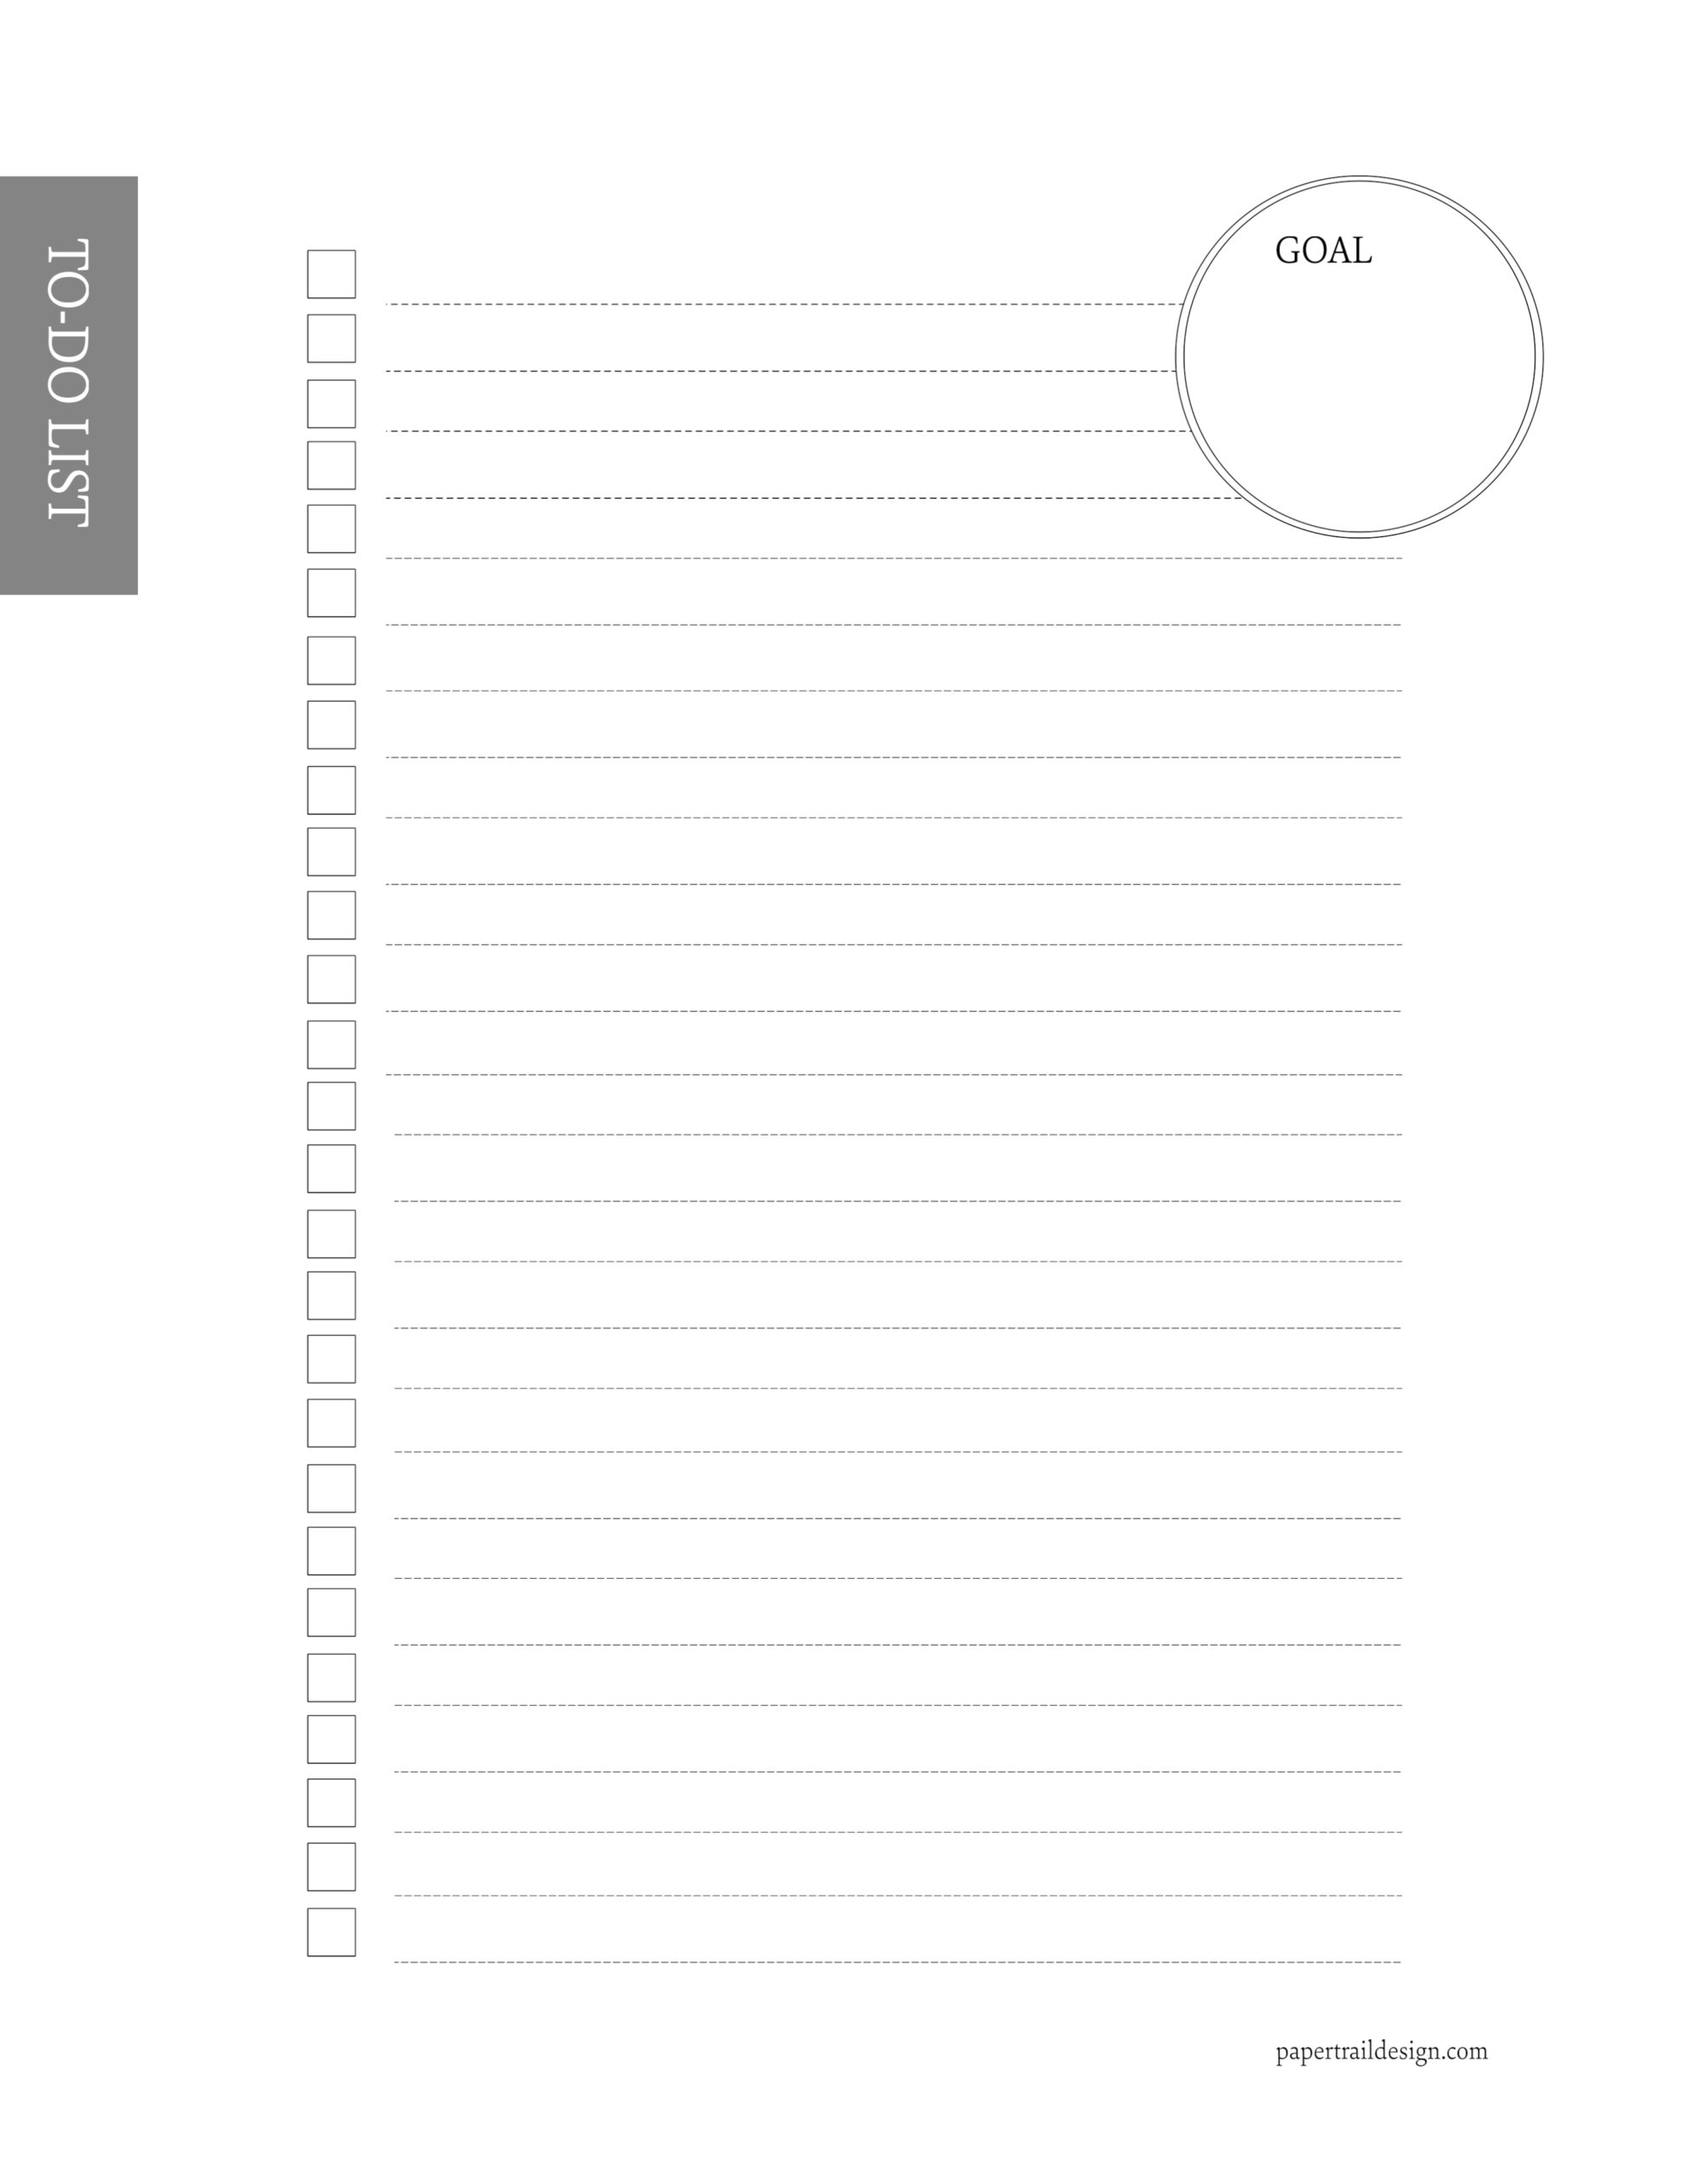 free-to-do-list-printable-template-paper-trail-design